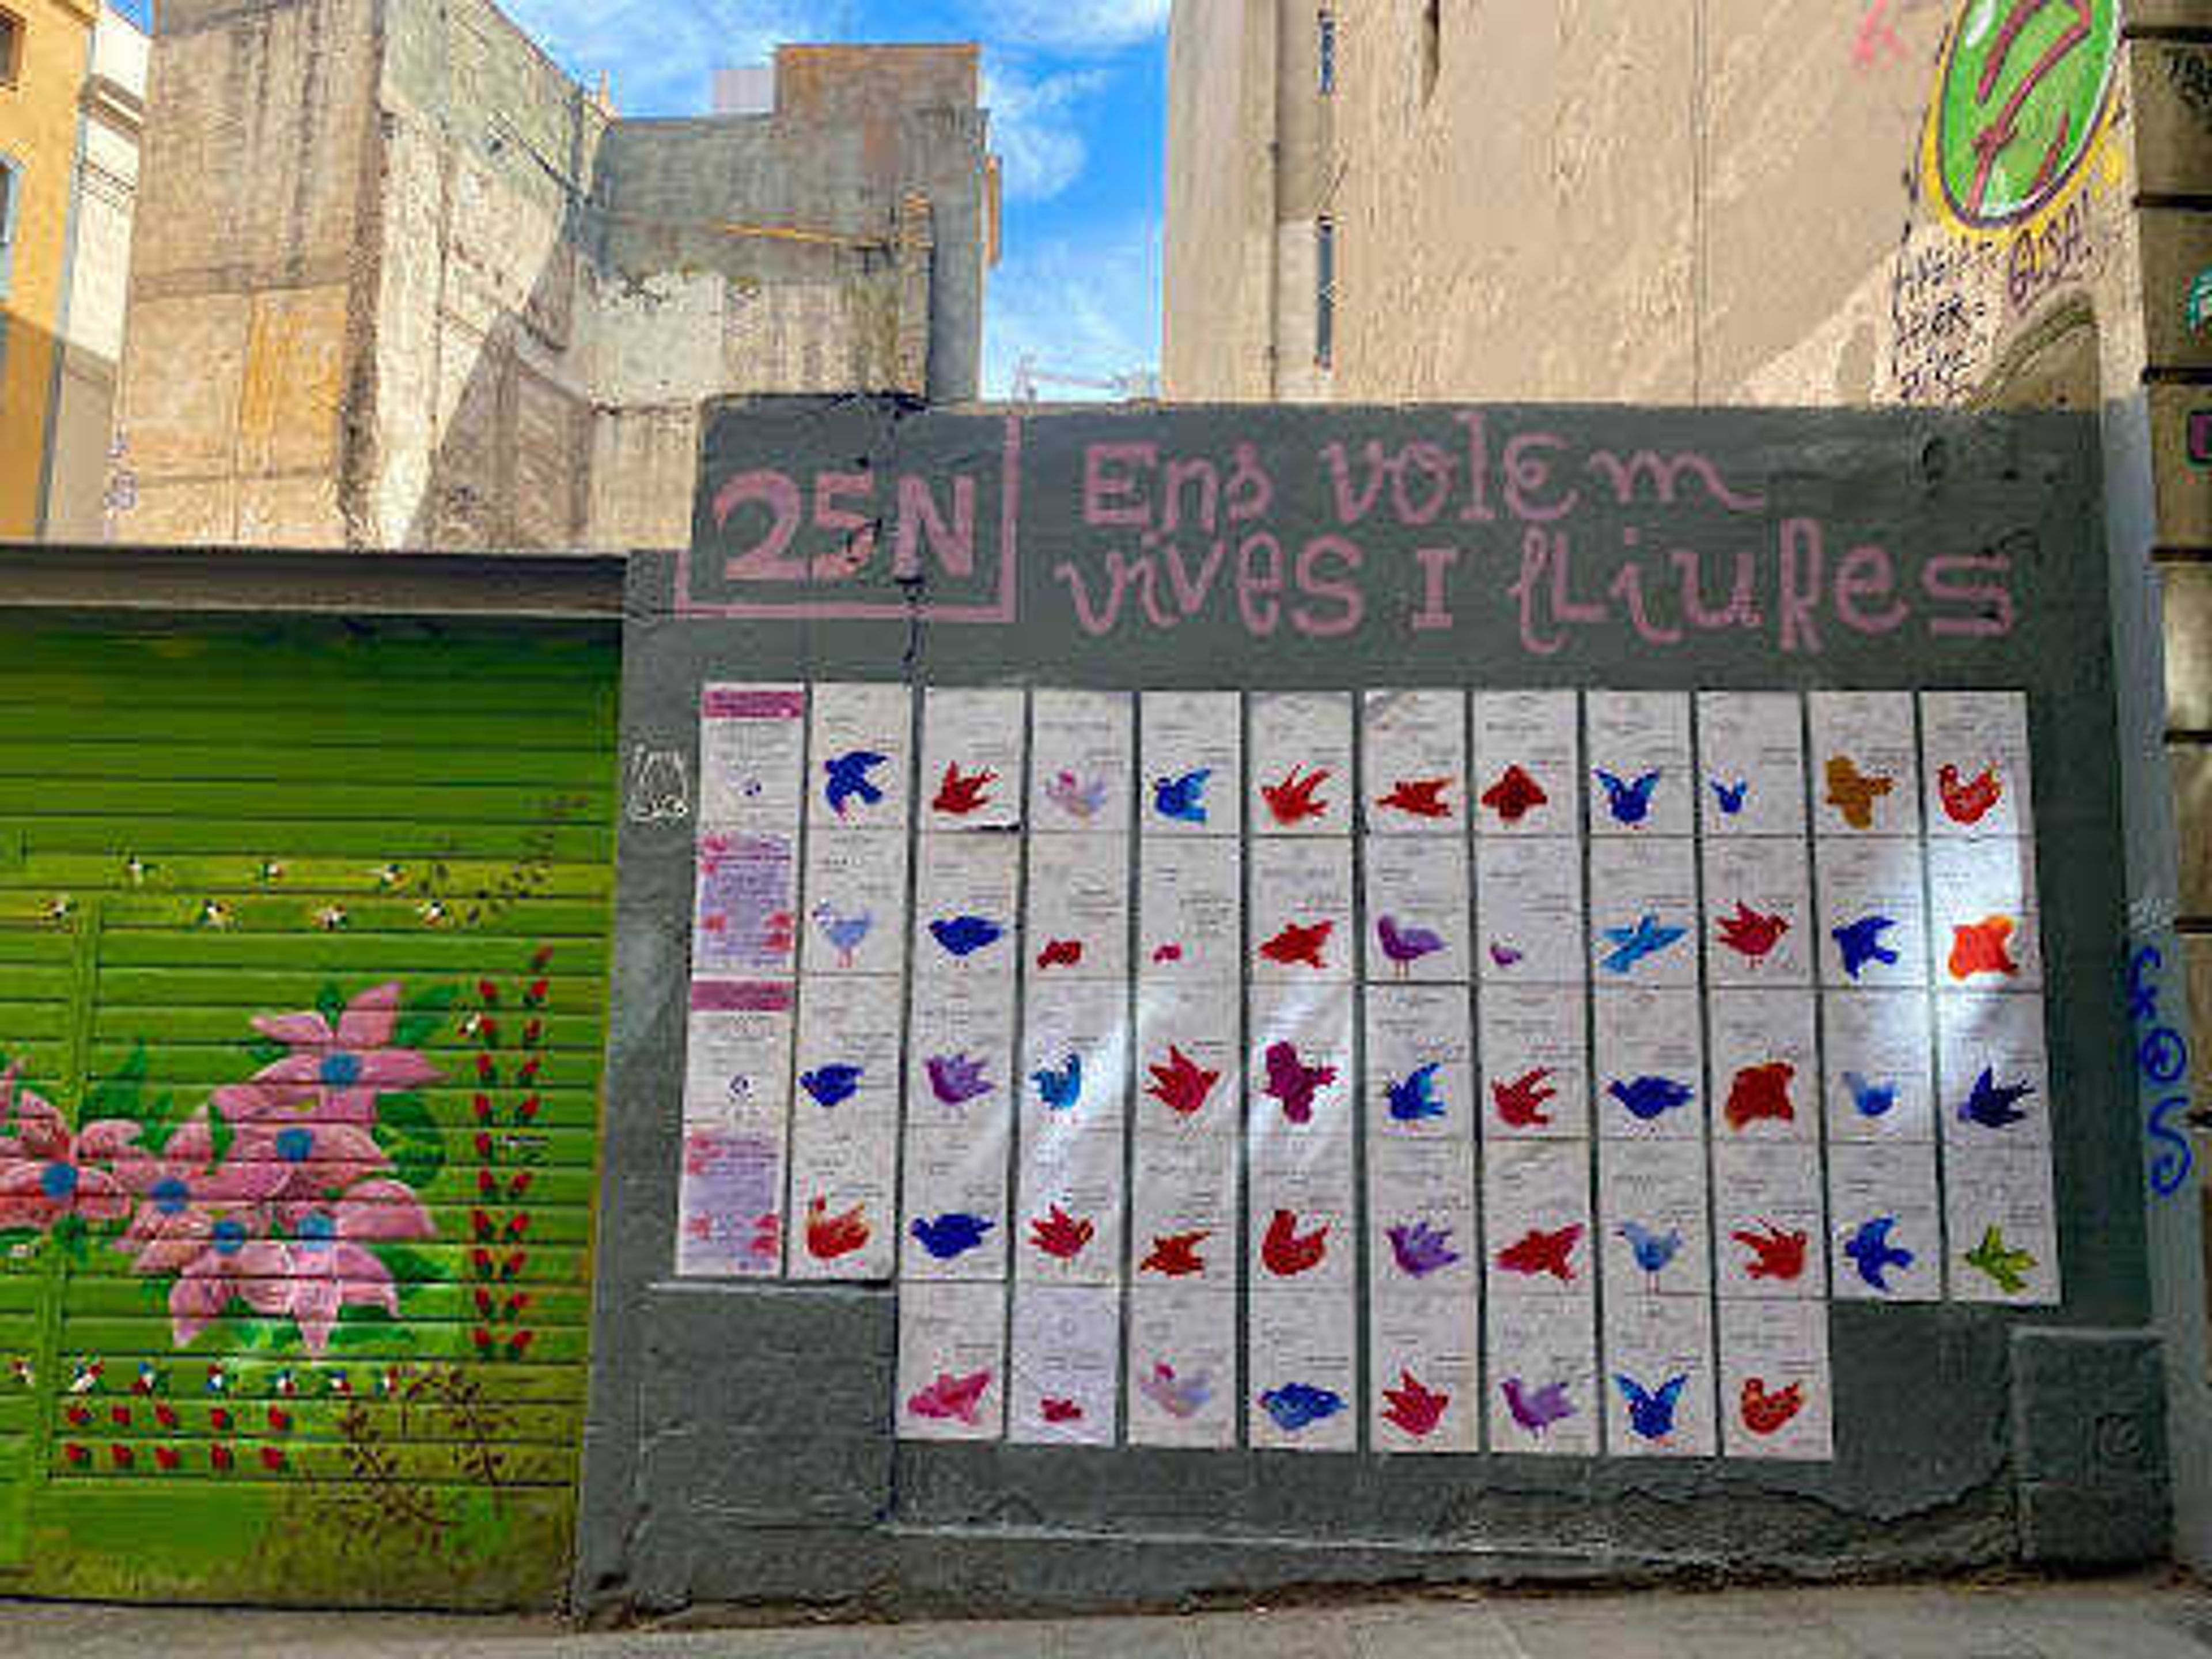 Translated from Catalan, this wall says, “We want to be alive and free.” The wall is covered in paintings of birds that symbolize women’s rights and freedom, painted by young girls in Barcelona.